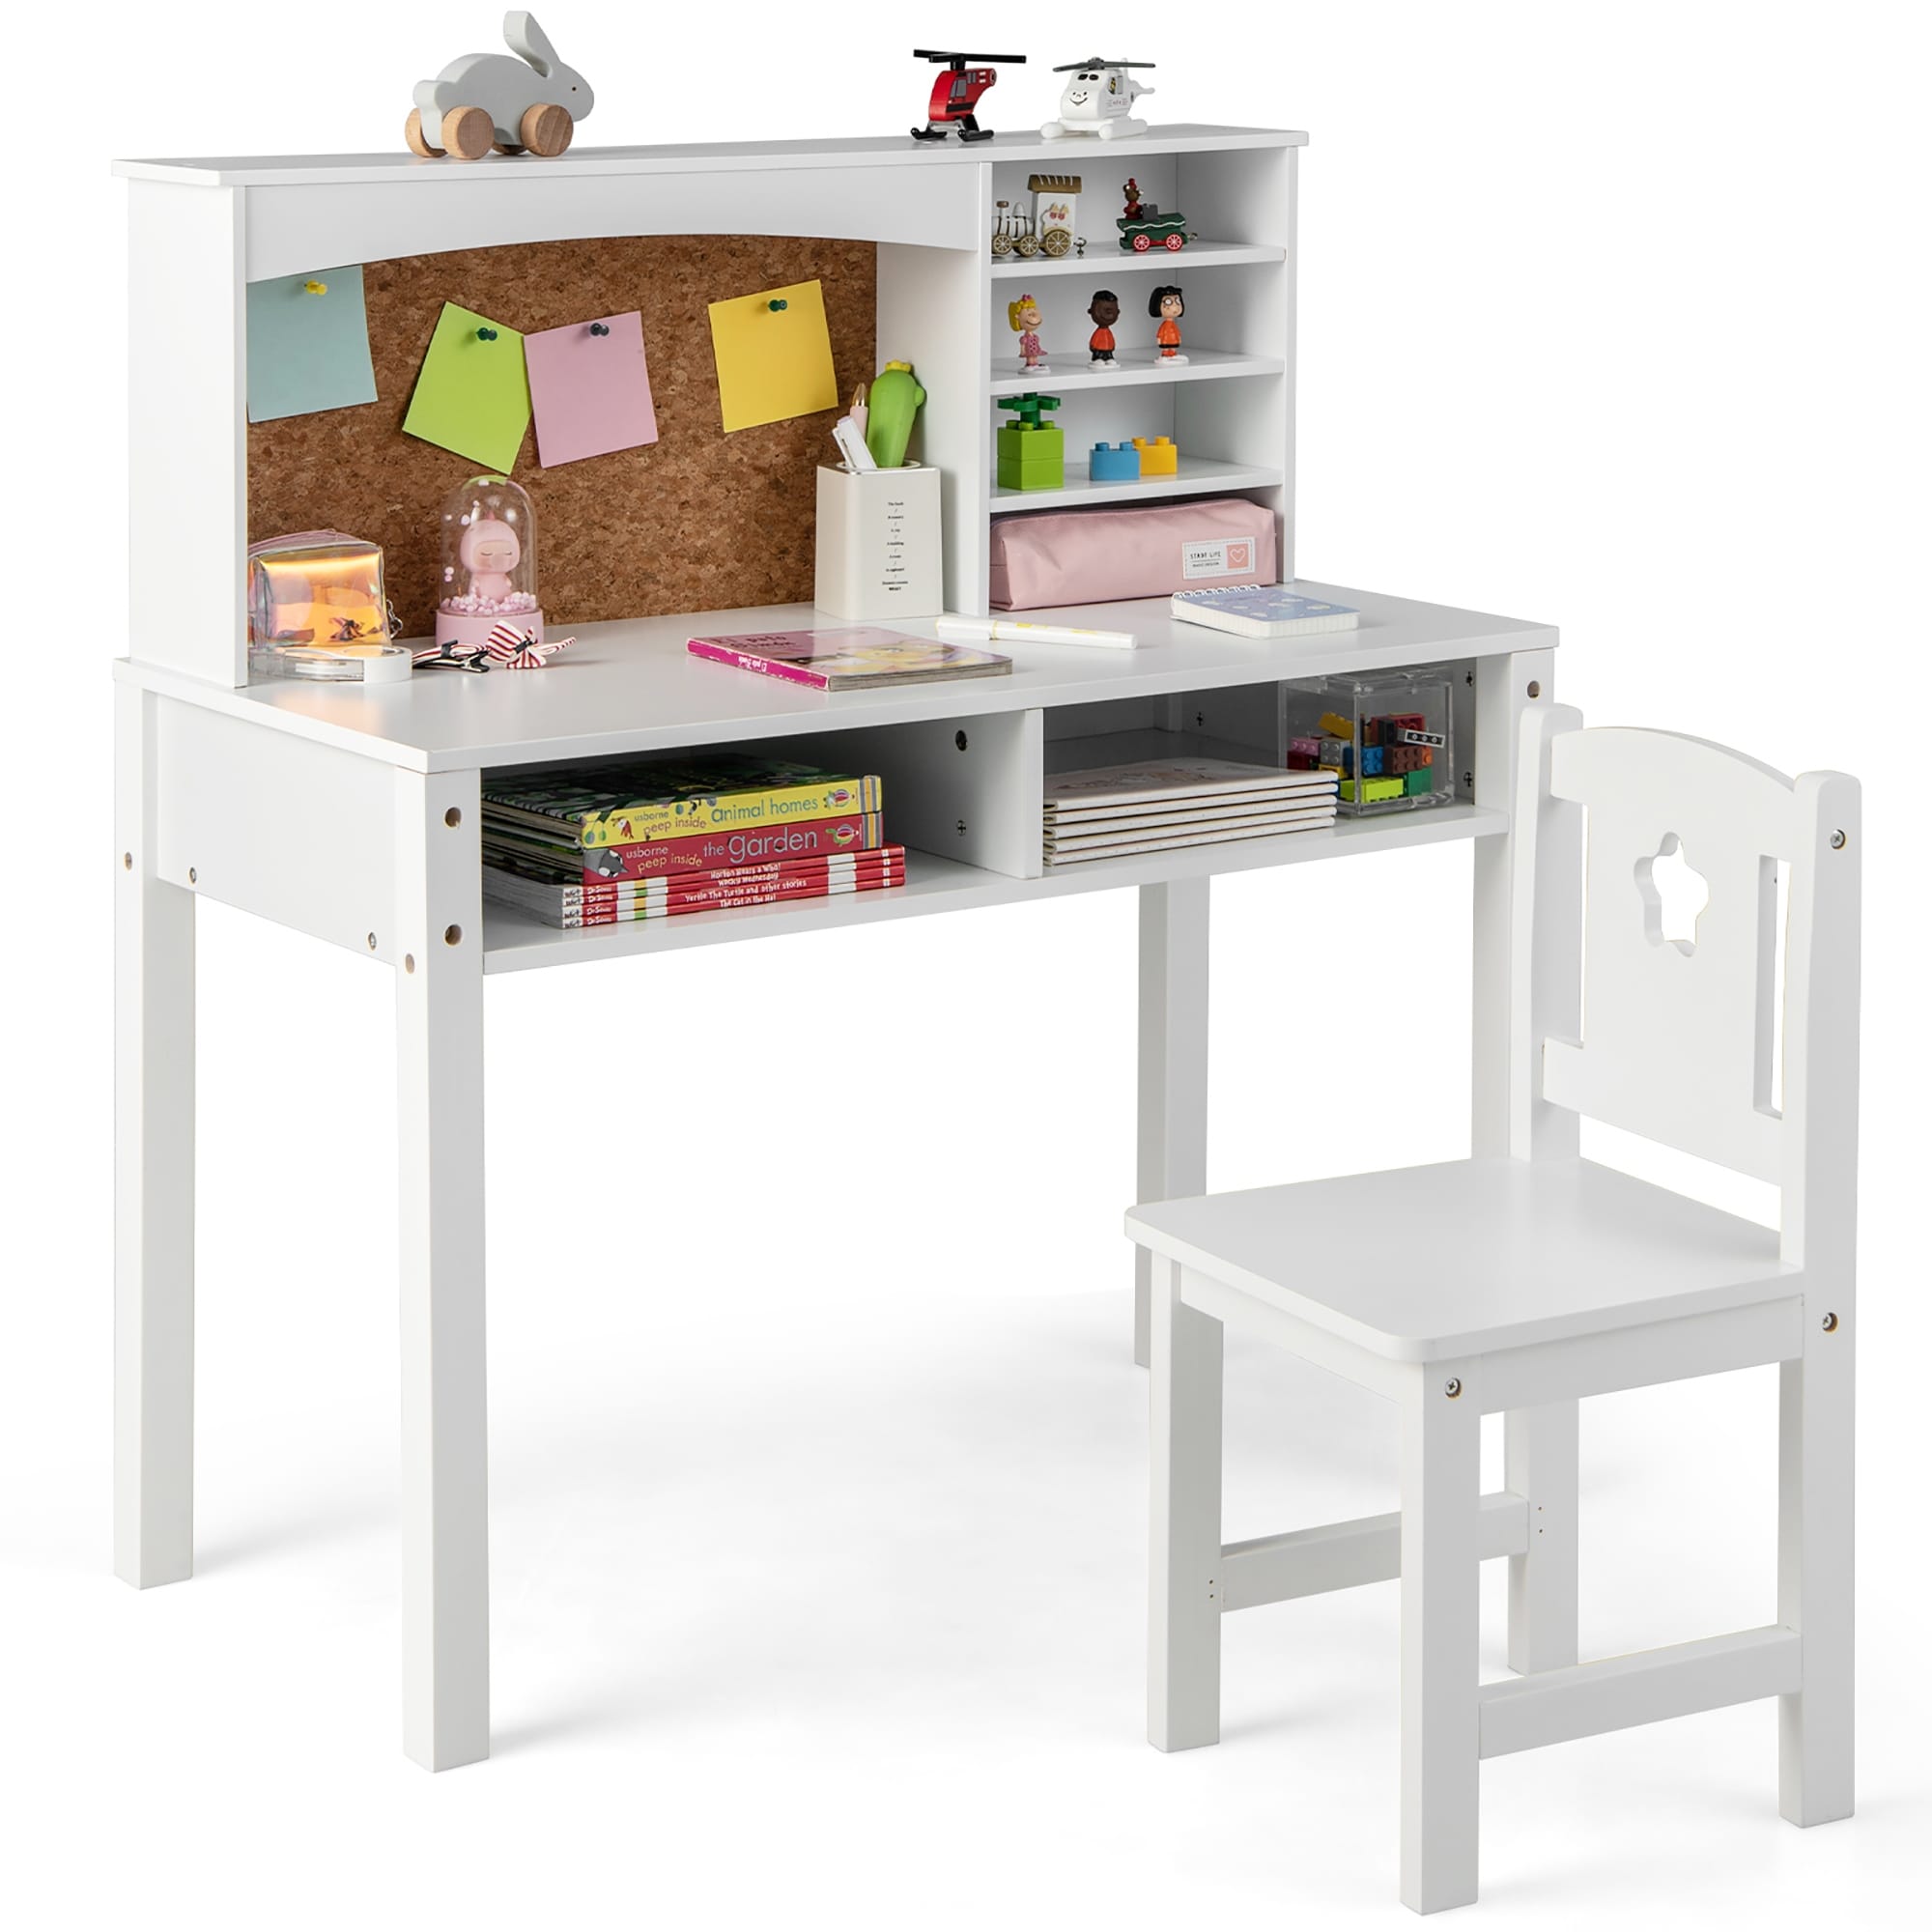 https://ak1.ostkcdn.com/images/products/is/images/direct/ccc9f51fe5a182b01335df70ead8af71fa90331b/Costway-Kids-Desk-and-Chair-Set-Study-Writing-Workstation-with-Hutch-%26.jpg